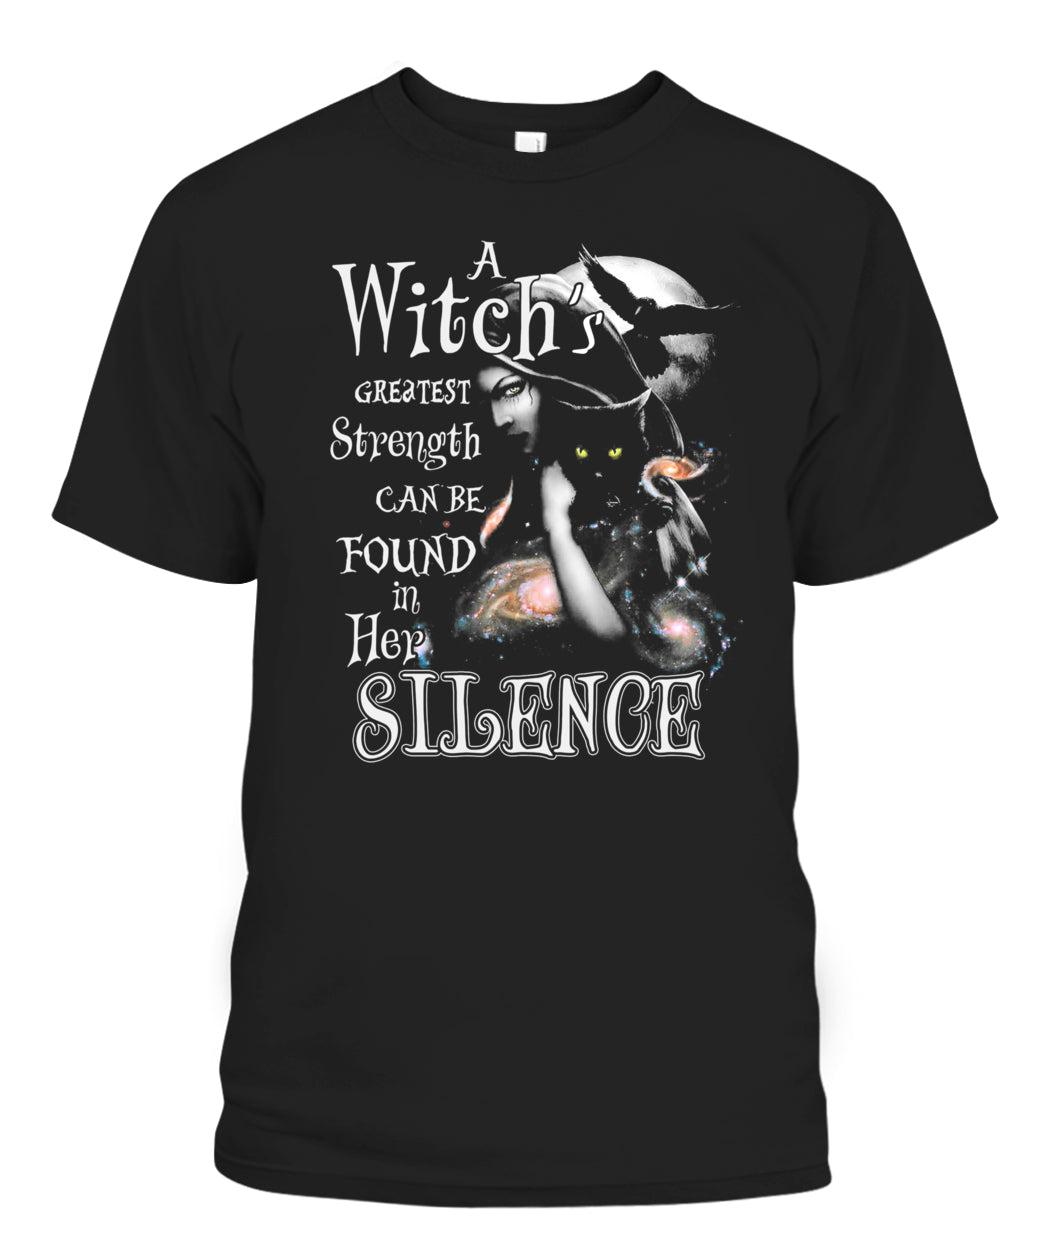 A Witch's greatest strength Tshirt Witchy Tee-MoonChildWorld